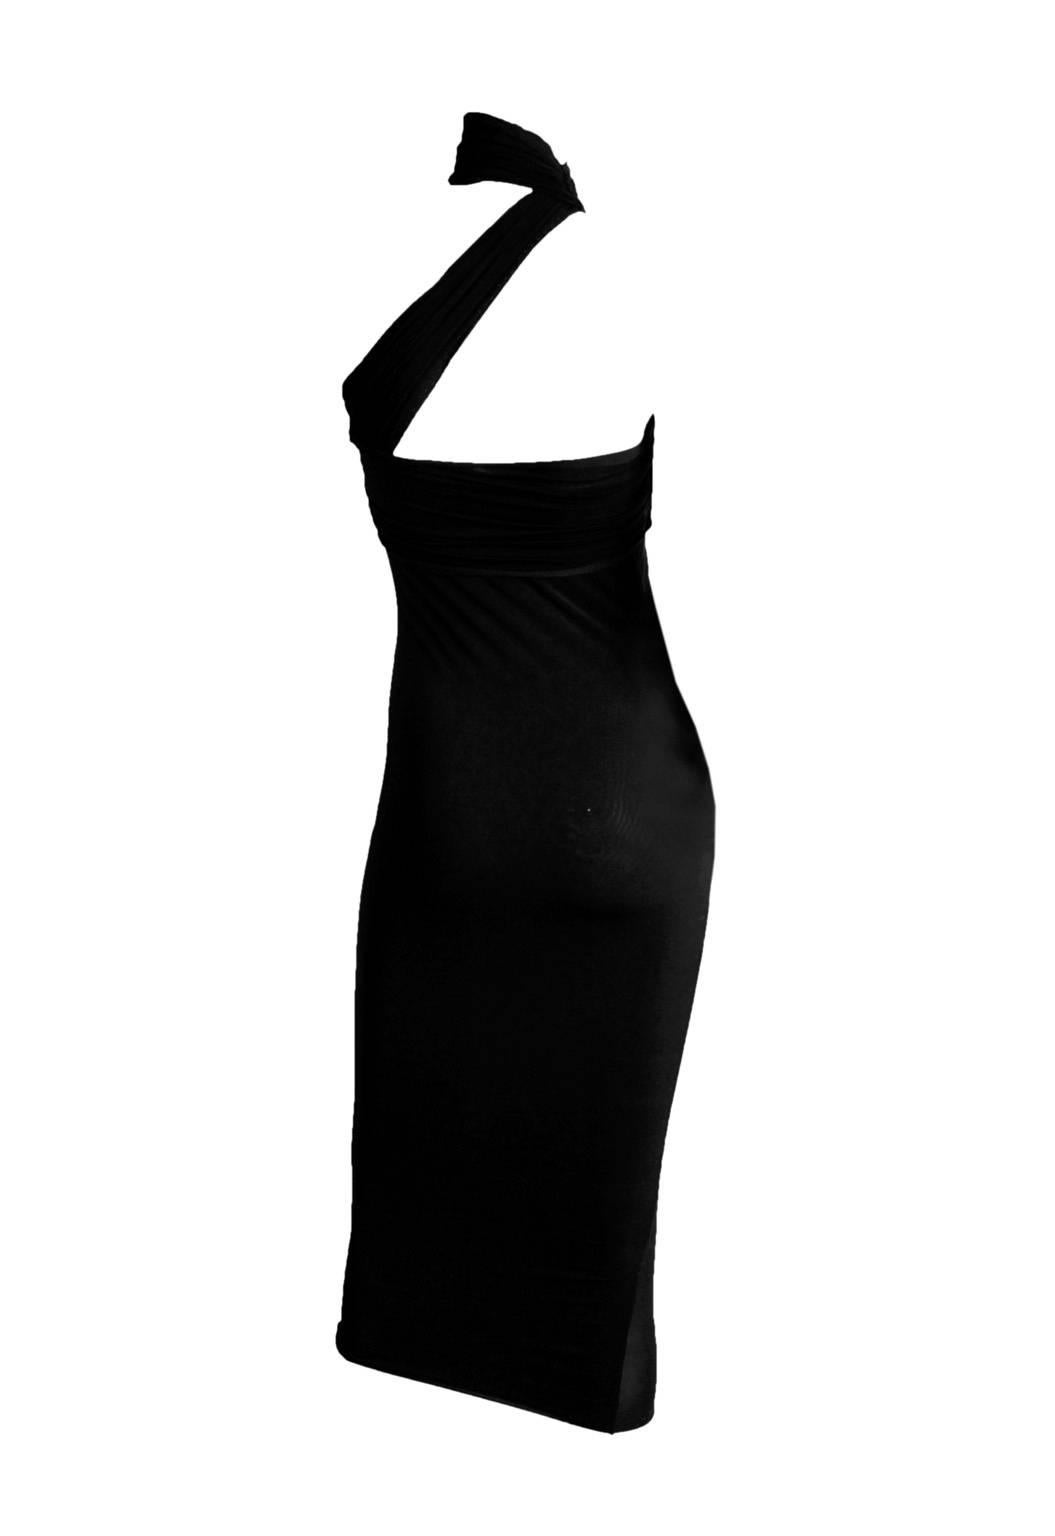 Uber-Rare & Incredibly Sexy Tom Ford For Gucci Fall Winter 2003 Collection Black Jersey Dress!

Who could ever forget Tom Ford's incredible Fall Winter 2003 collection for Gucci? Well this dreamy black jersey dress was surely one of the